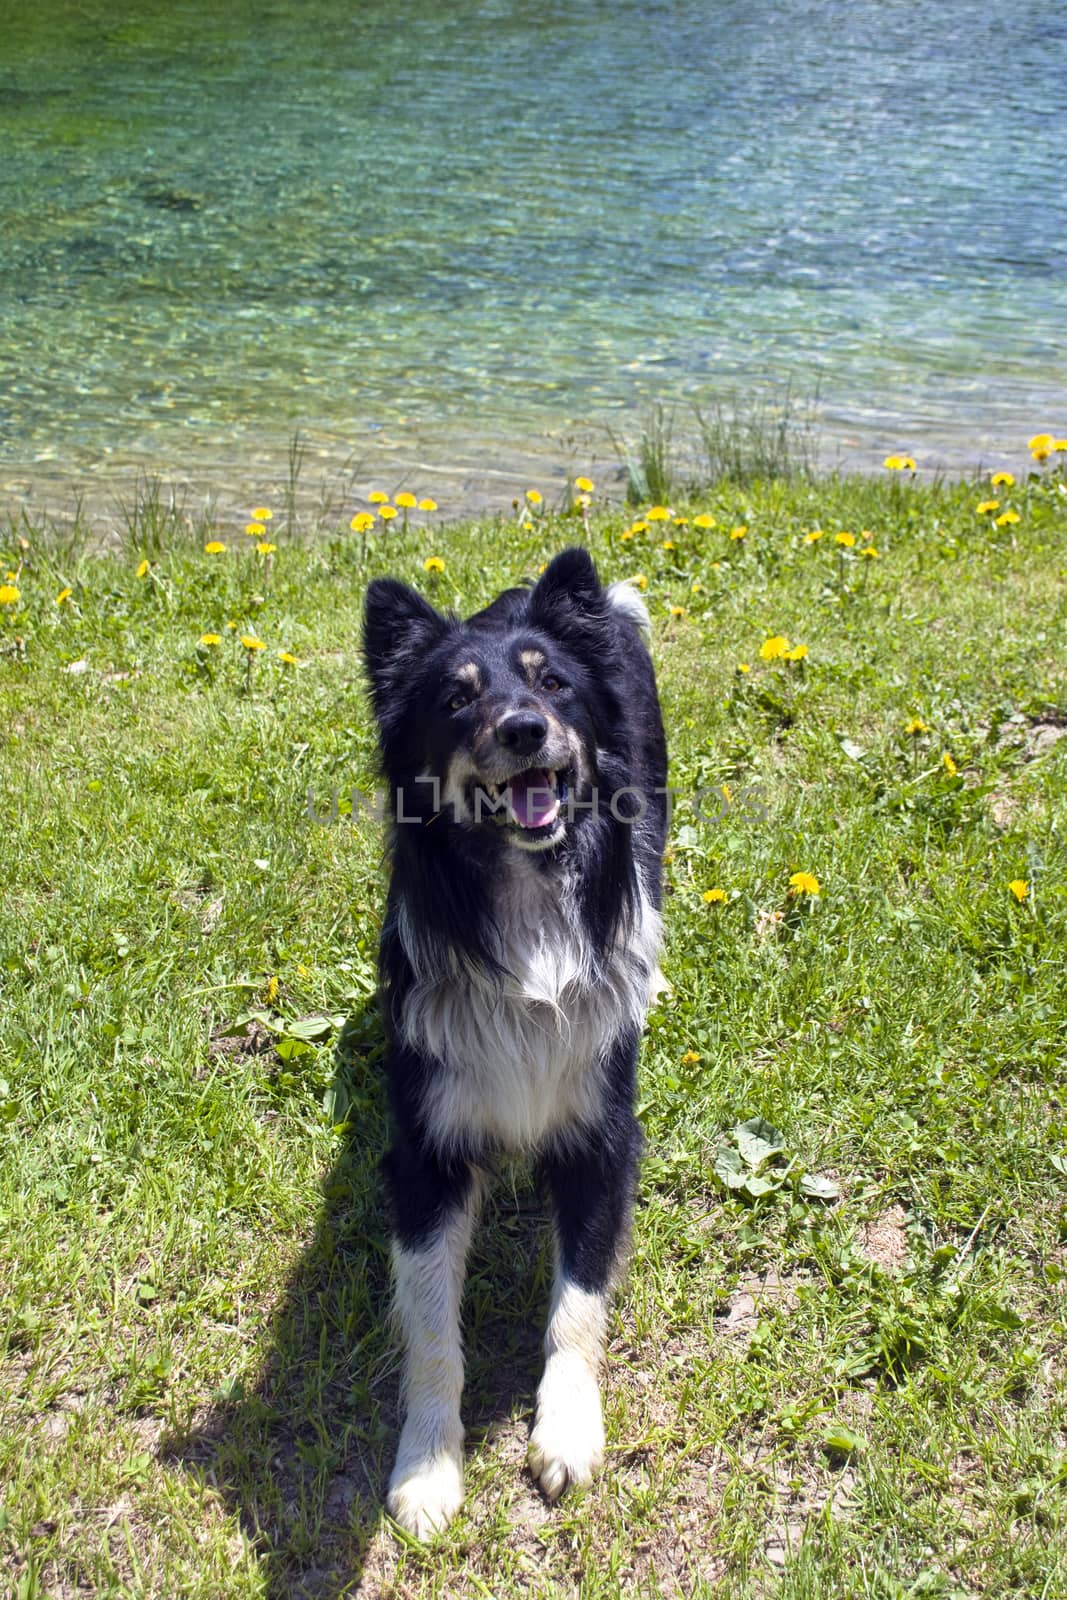 The playful dog by the lake